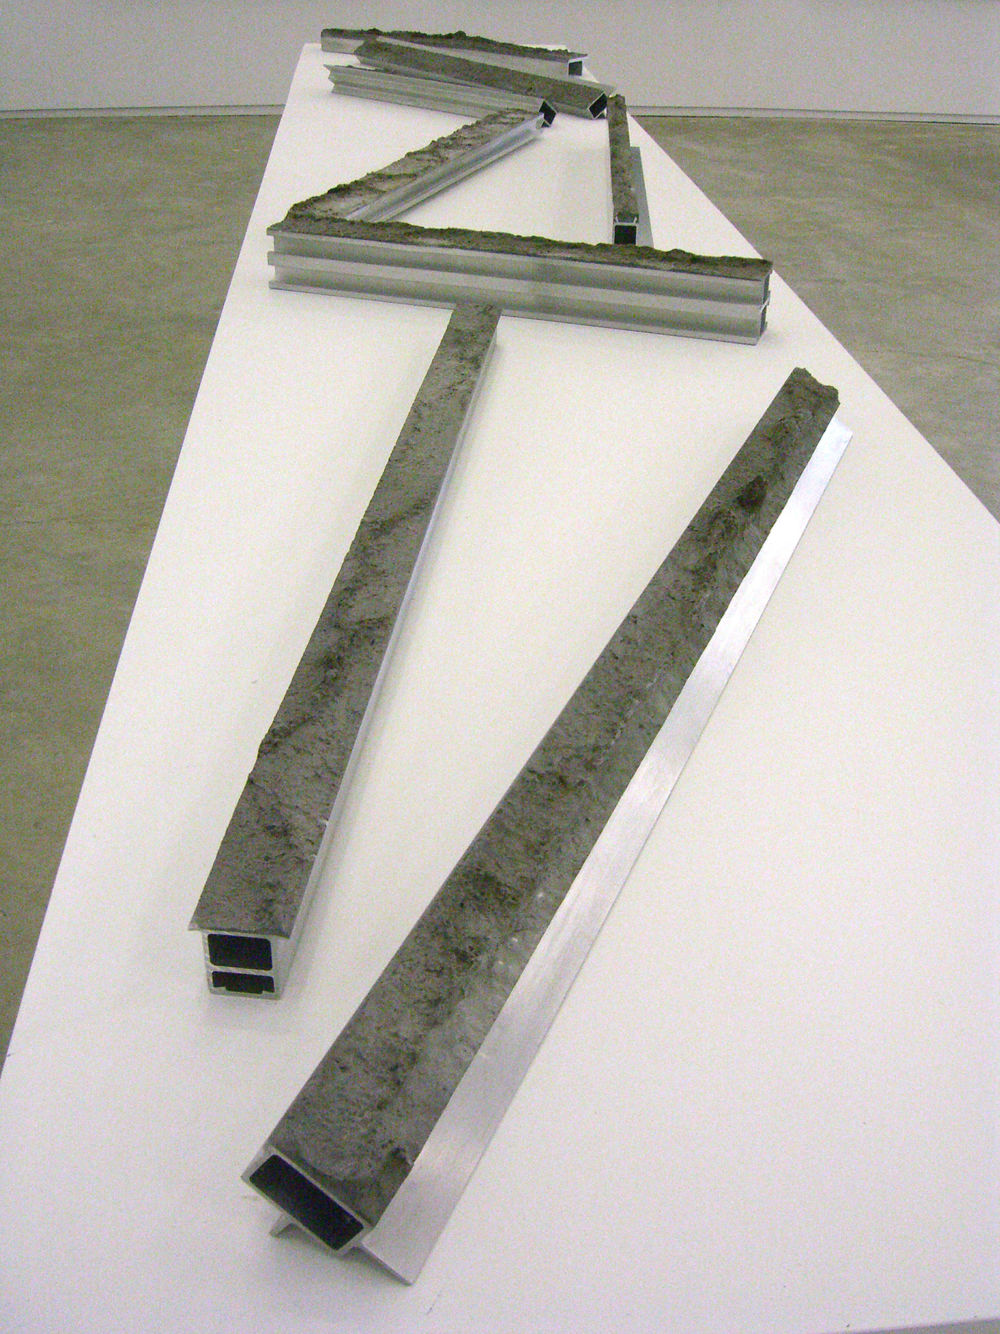 ​Germaine Koh, Pressions Topographiques, 2005, aluminum-factory waste, metallized polyester, traces of asphalt and dirt, dimensions variable by 